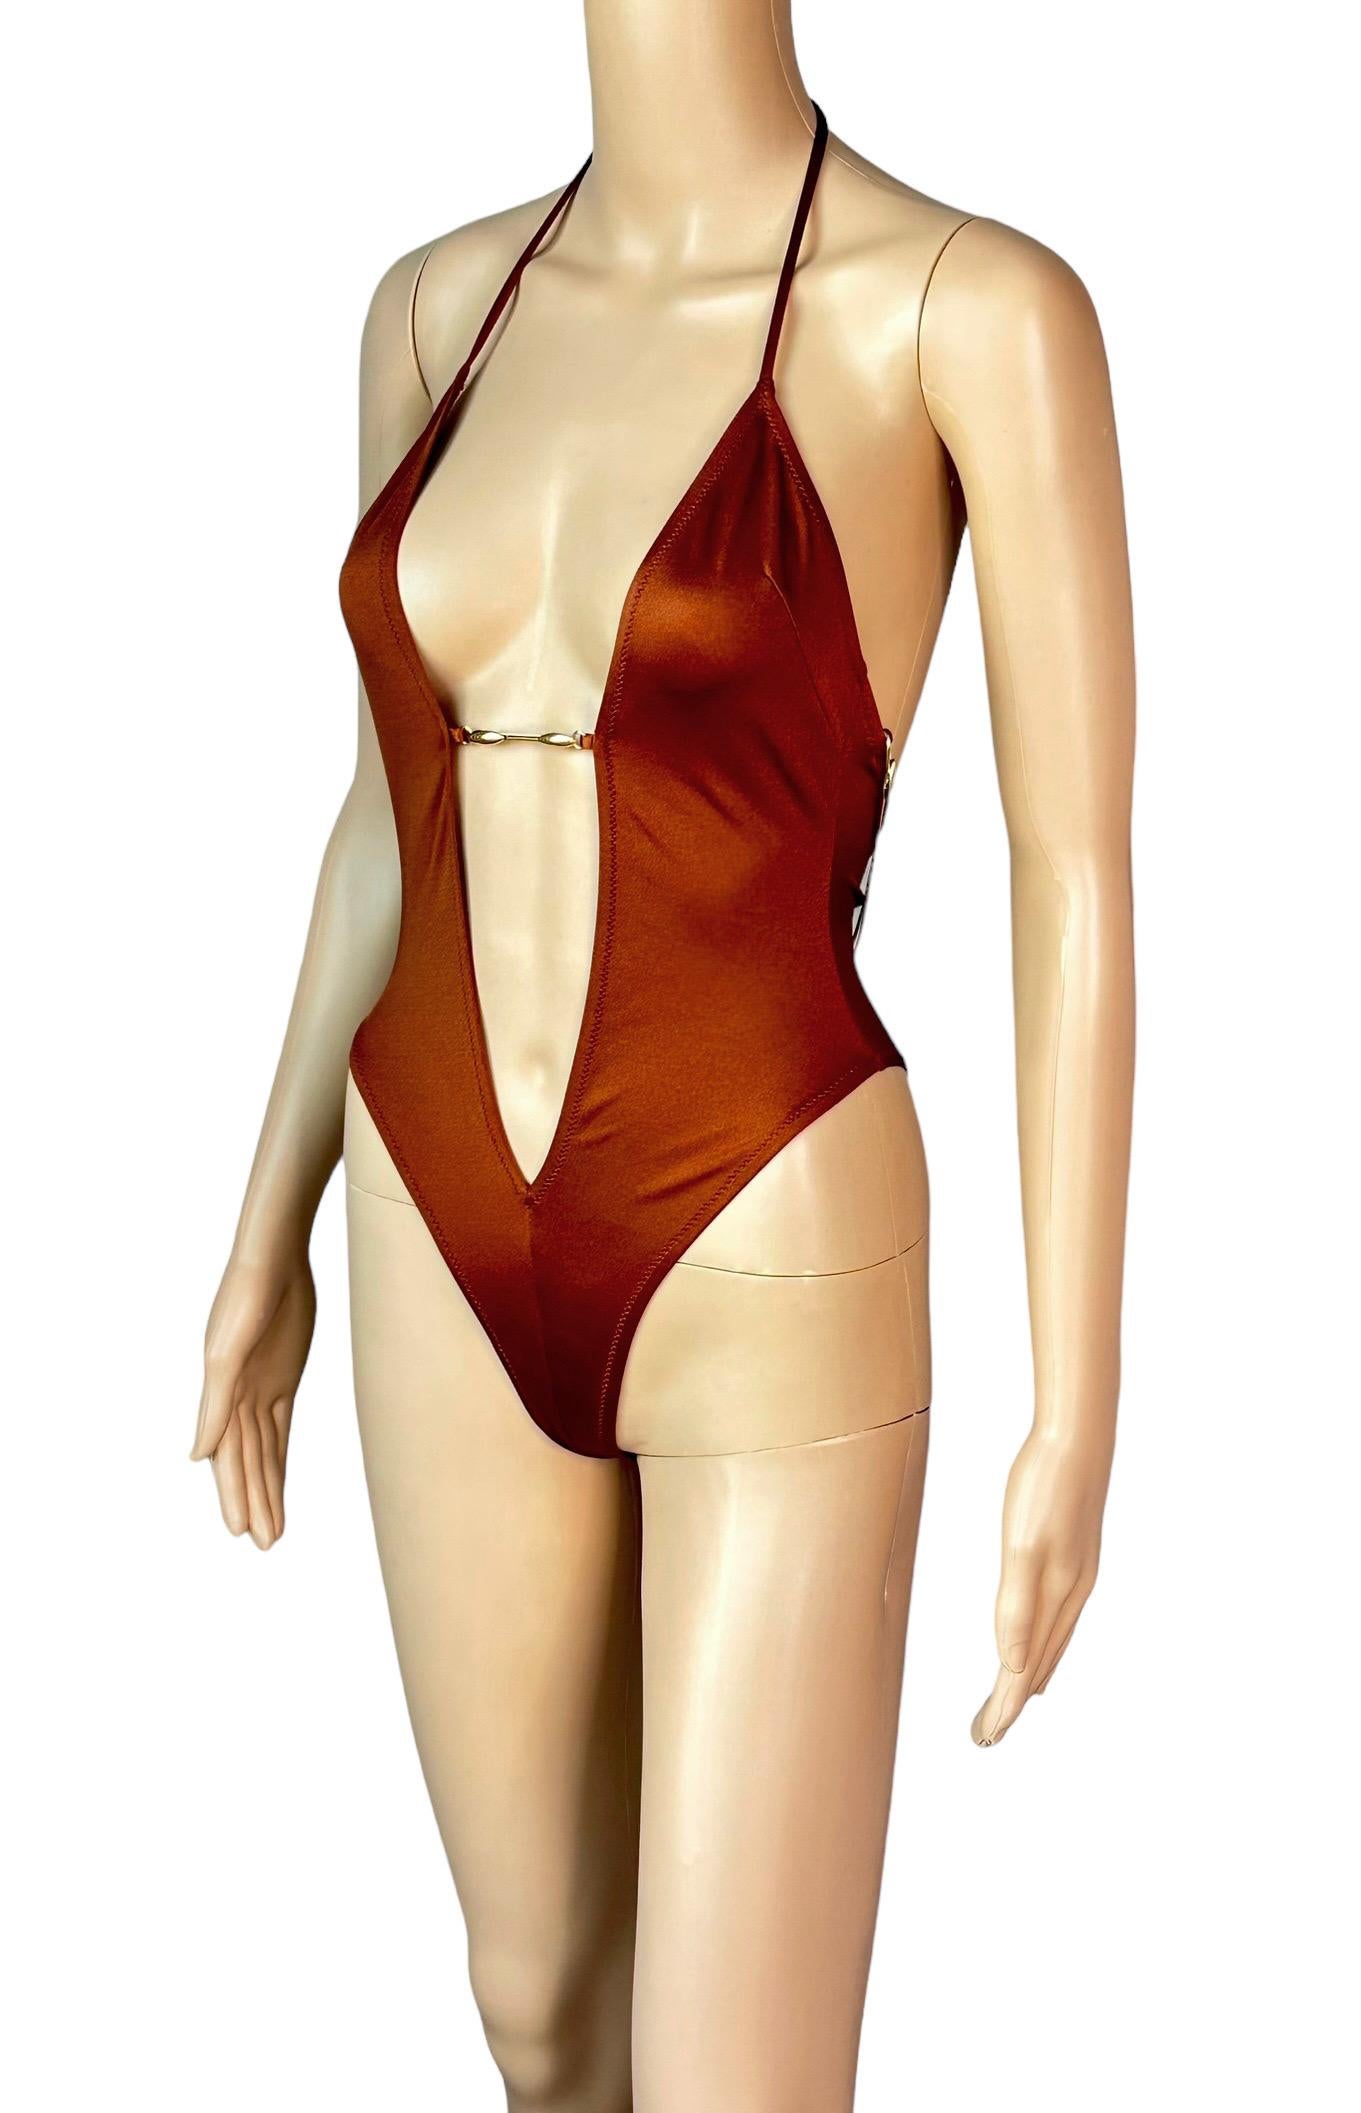 Dolce & Gabbana 1990's Vintage Gold Chains Plunging Brown One Piece Bodysuit Swimwear Swimsuit

Excellent Condition. Please note size tag is missing.

FOLLOW US ON INSTAGRAM @OPULENTADDICT